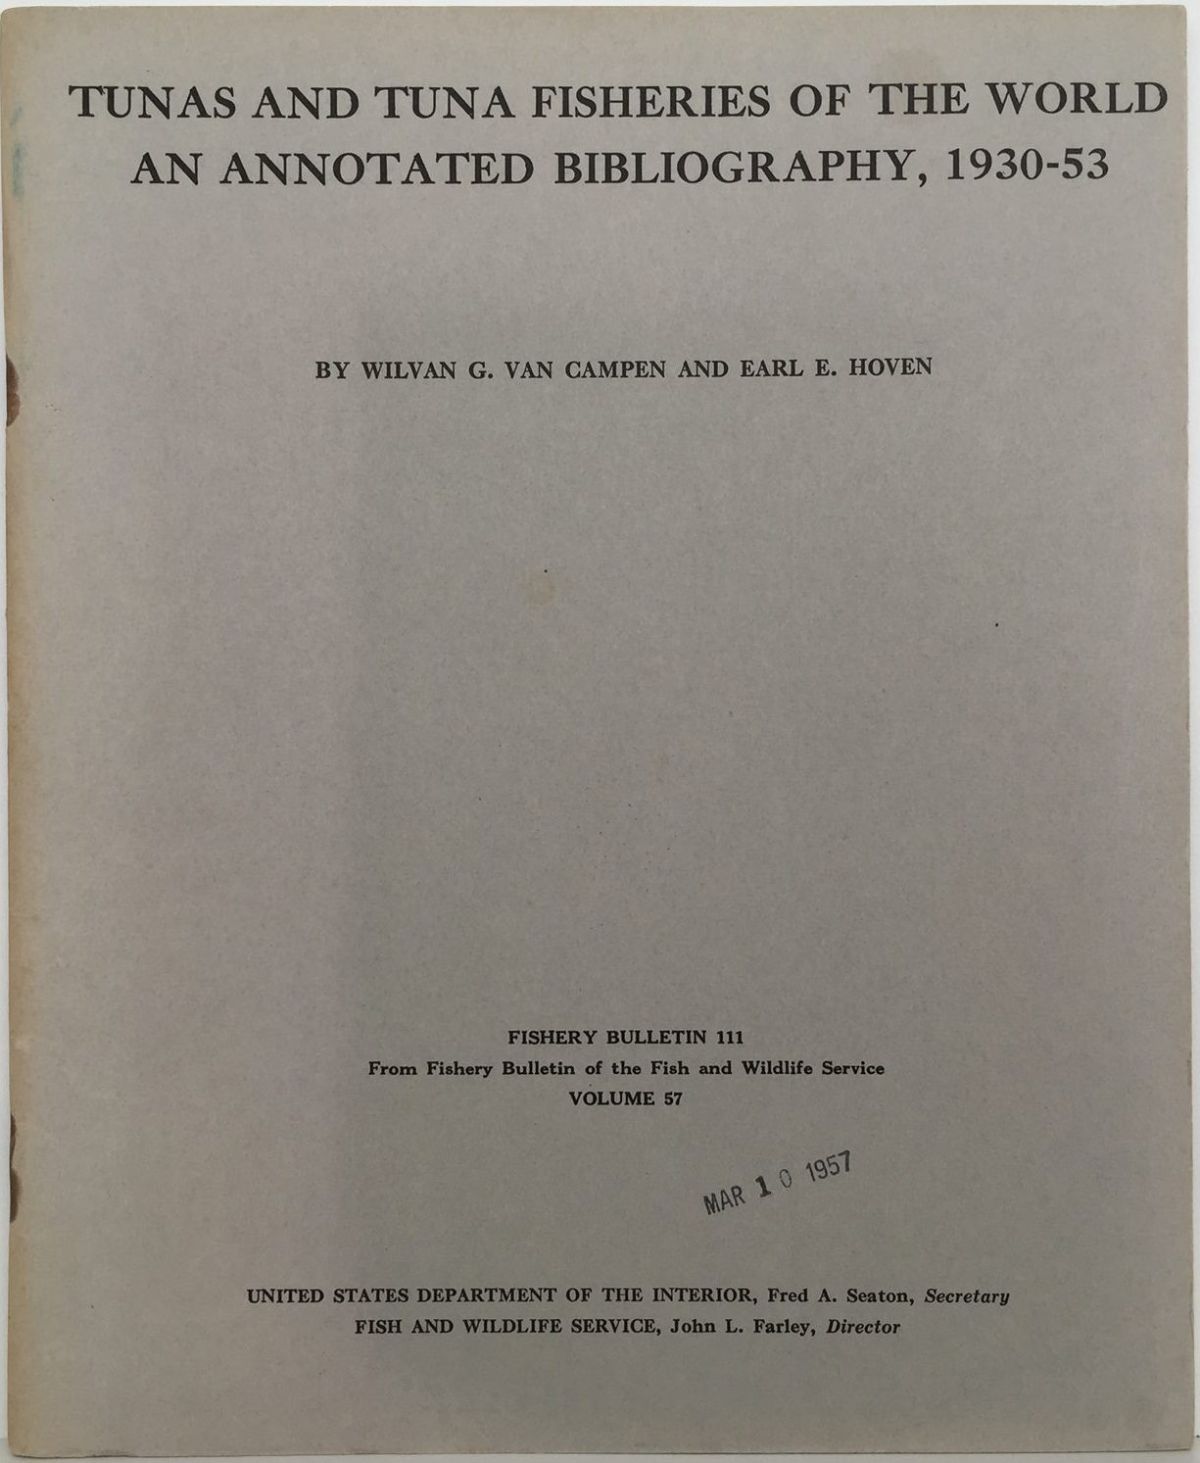 TUNAS AND TUNA FISHERIES OF THE WORLD: An annotated bibliography 1930-1953 VOL 57